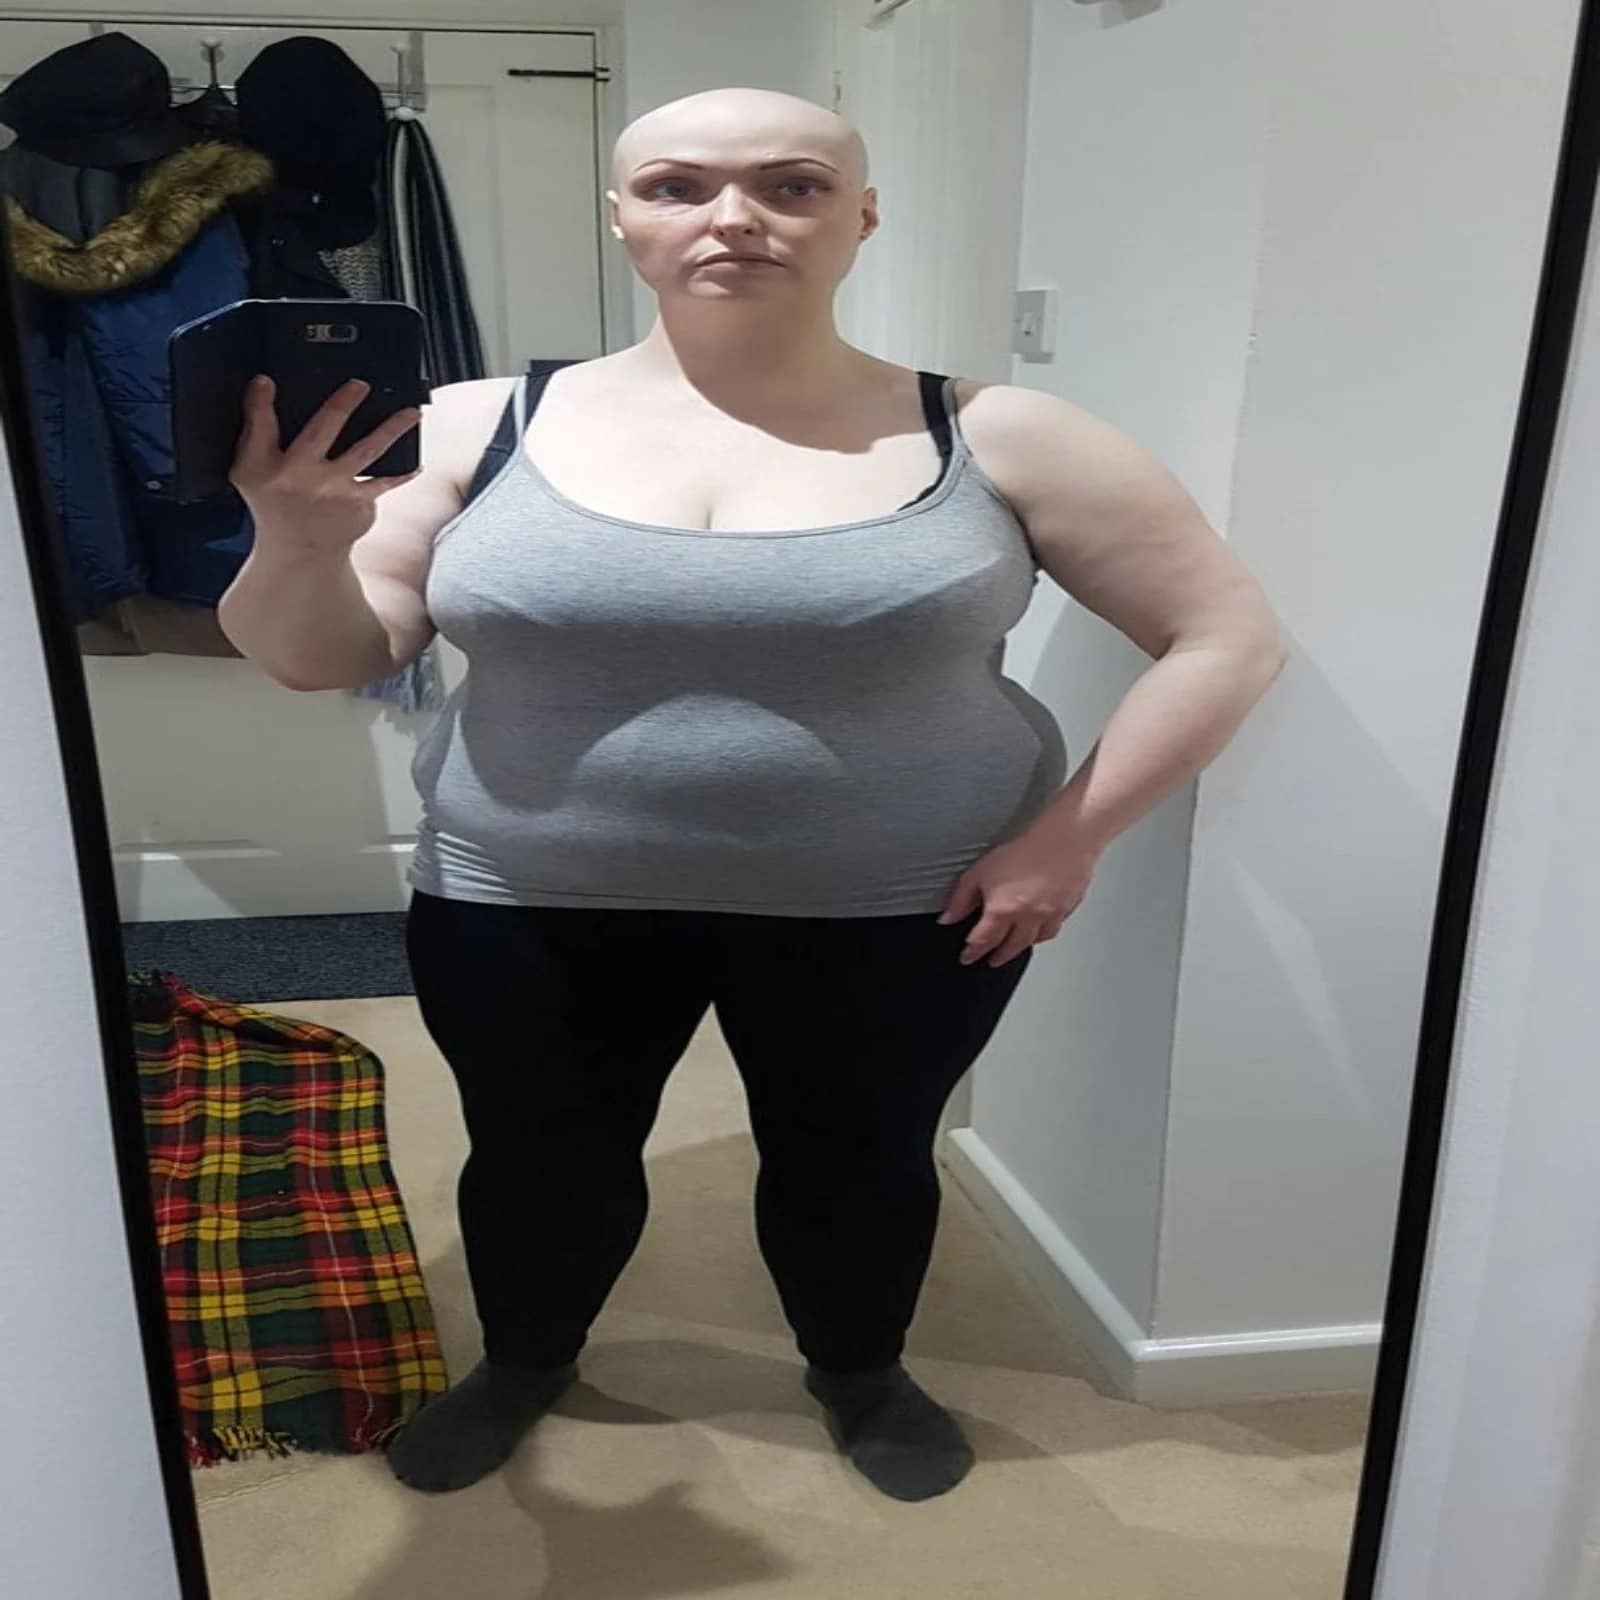 london woman weight loss by deleting social media